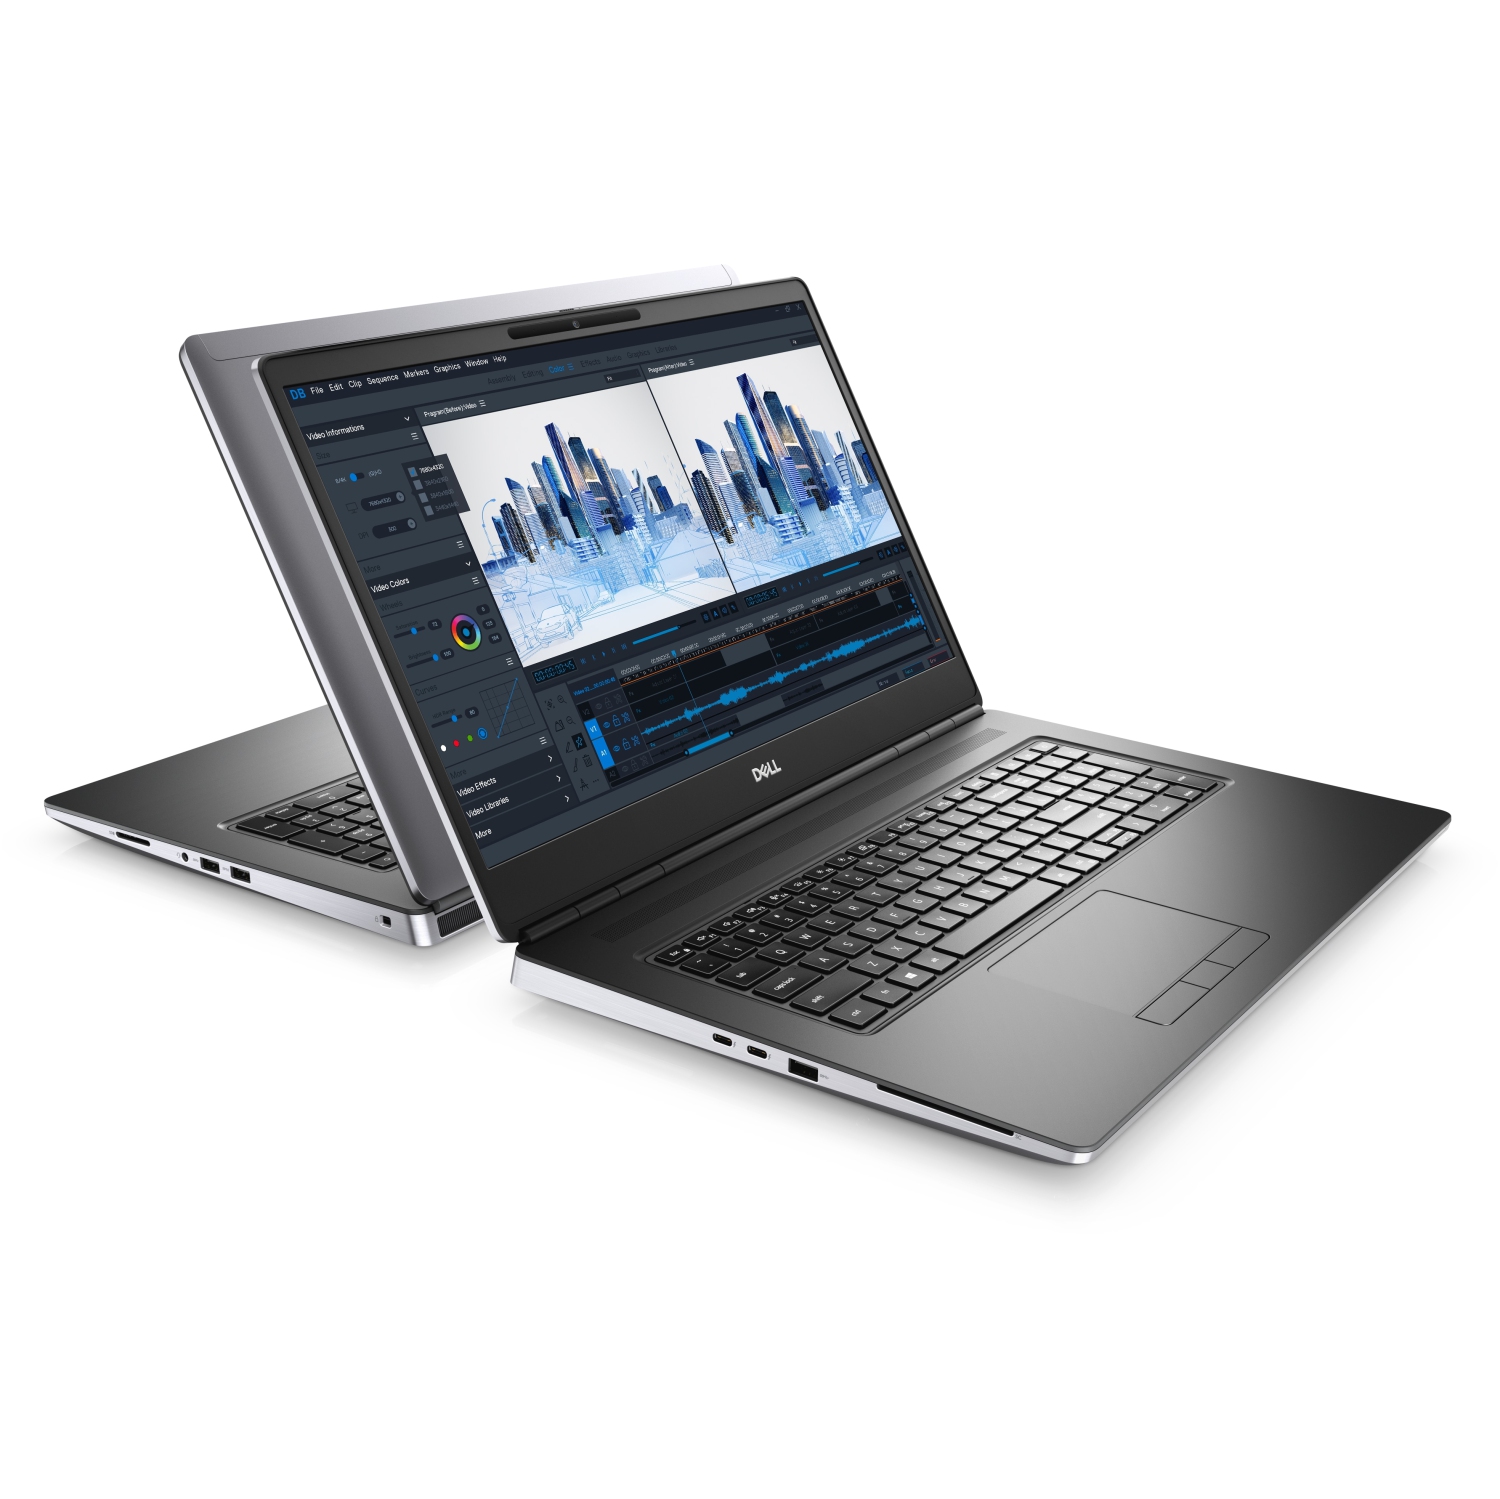 Refurbished (Excellent) - Dell Precision 7000 7760 Workstation Laptop (2021), 17.3" FHD, Core i9, 512GB SSD, 32GB RAM, RTX A5000, 5 GHz, 11th Gen CPU Certified